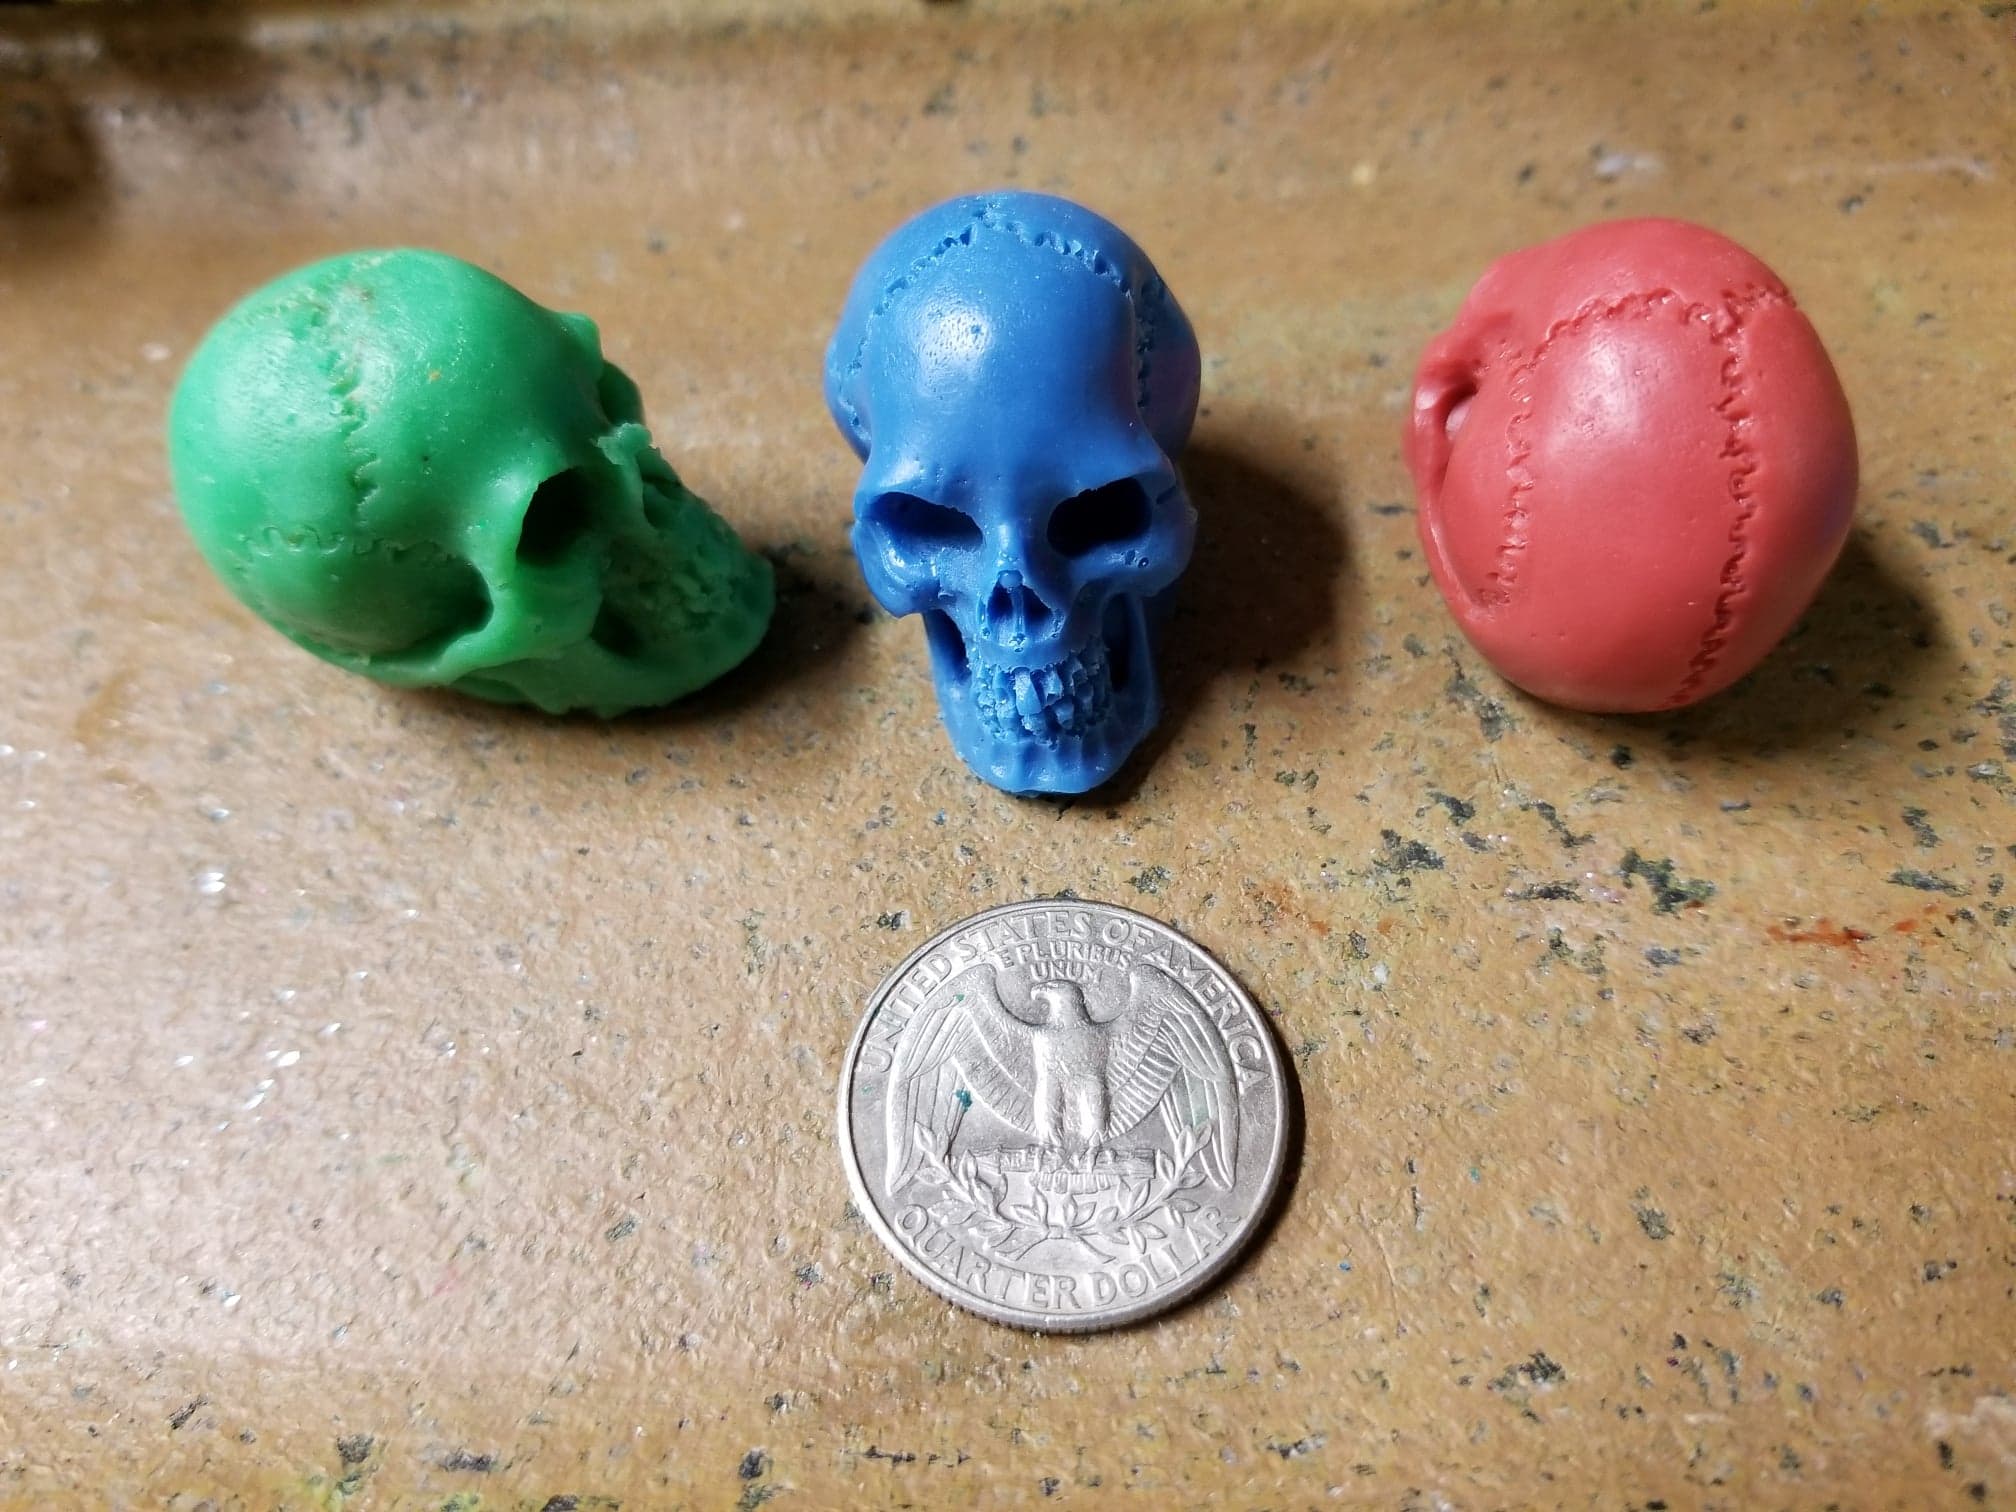 https://www.vanyulay.com/wp-content/uploads/2018/07/Skull-Embed-Silicone-Mold-5532-2.jpg